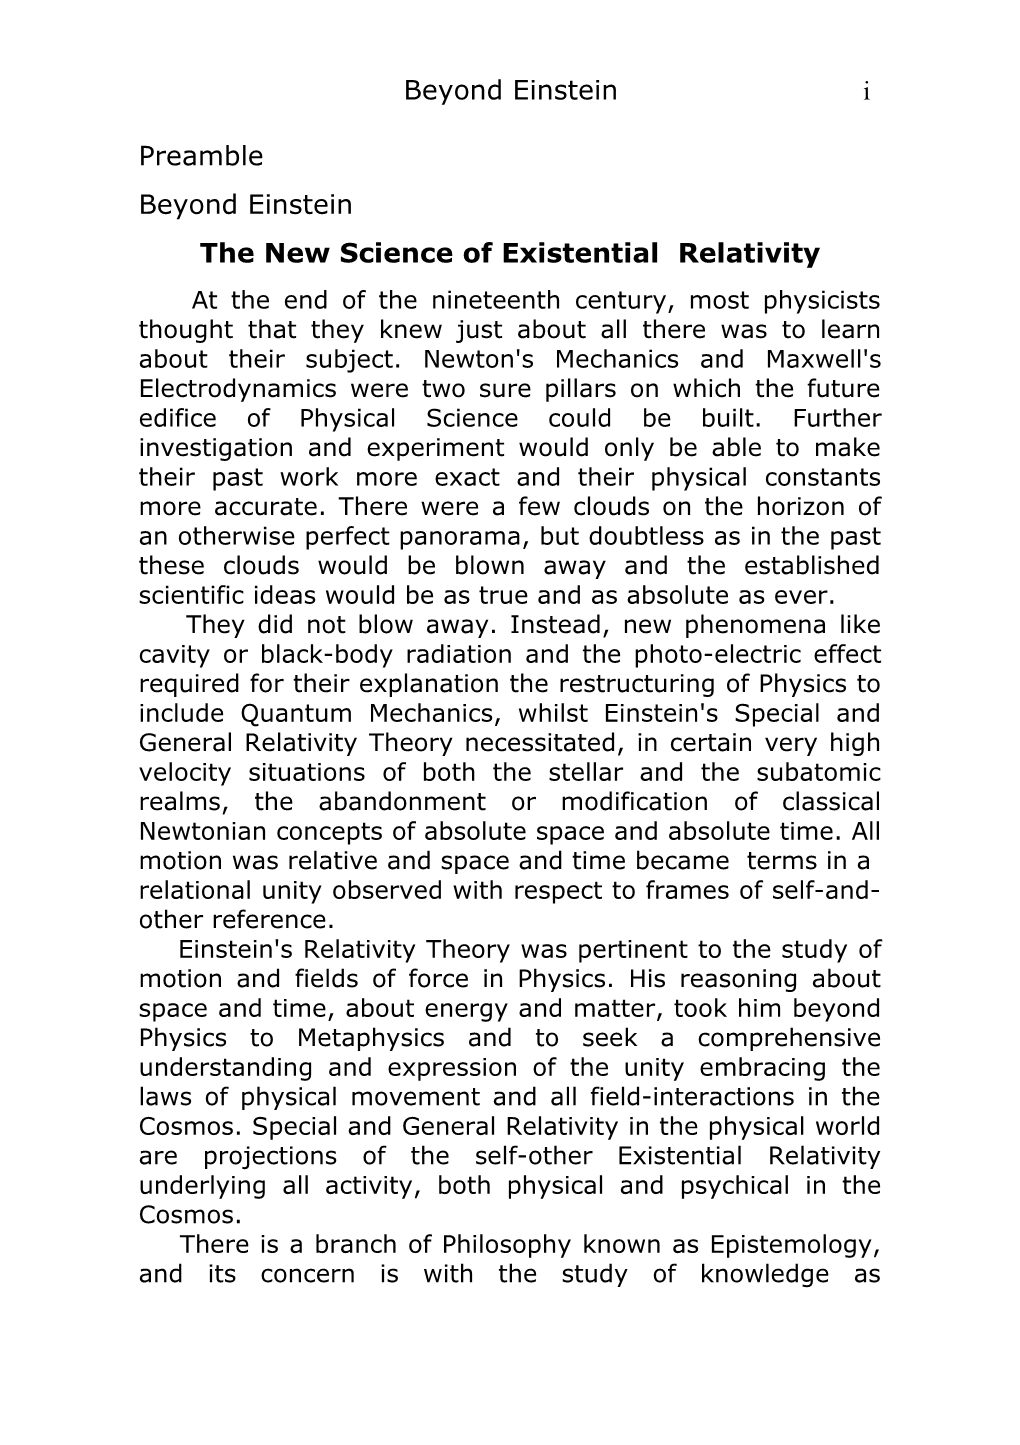 The New Science of Existential Relativity